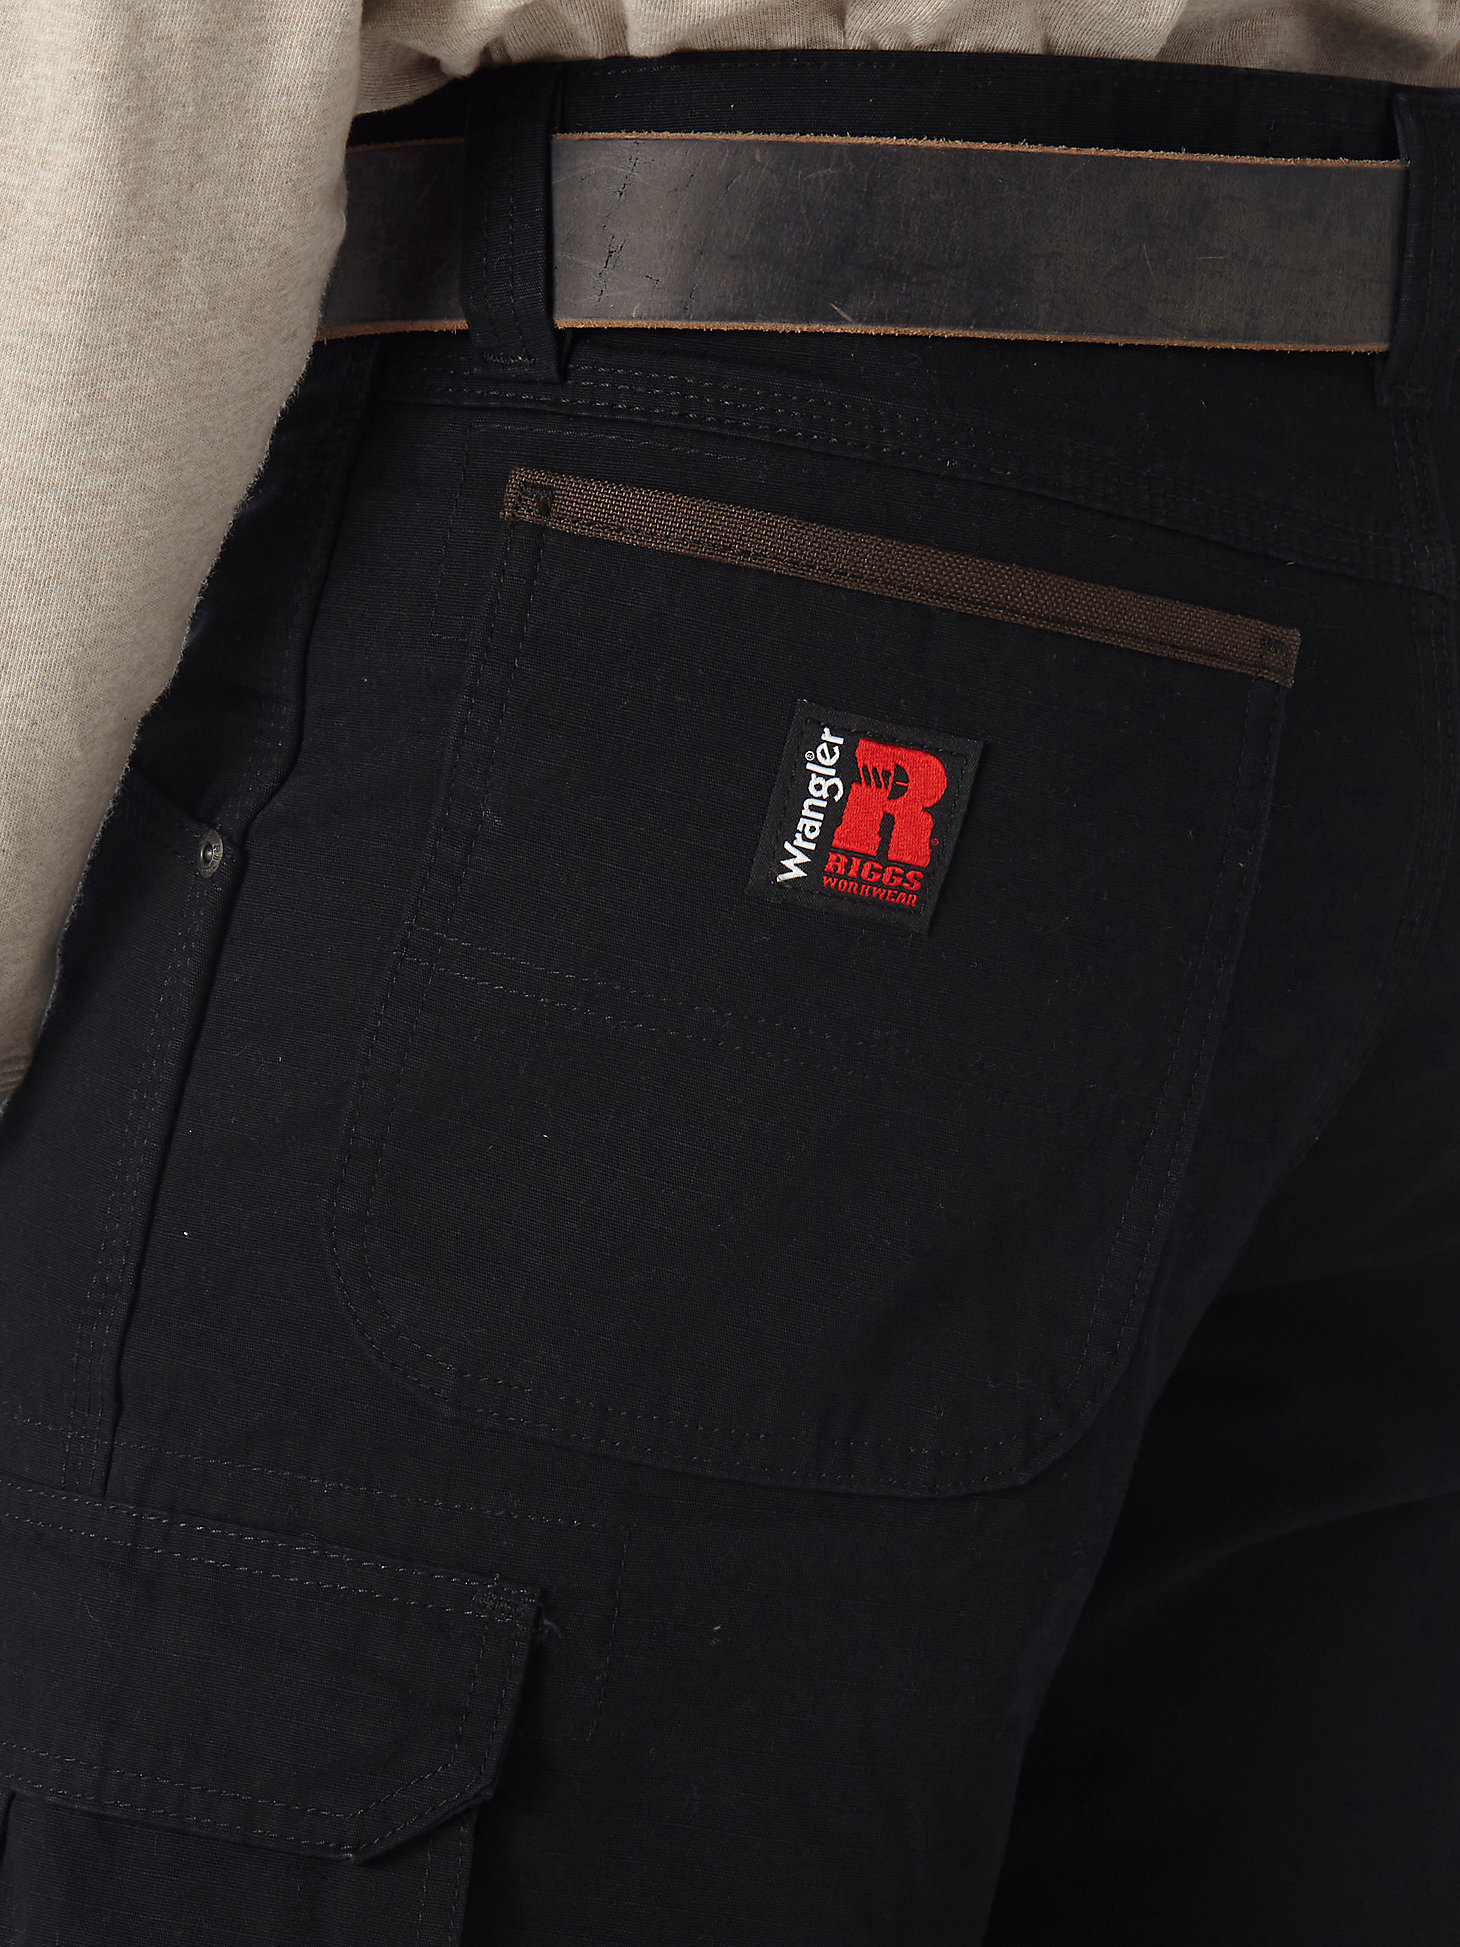 Wrangler RIGGS WORKWEAR® Lined Ripstop Ranger Pant in Black alternative view 3